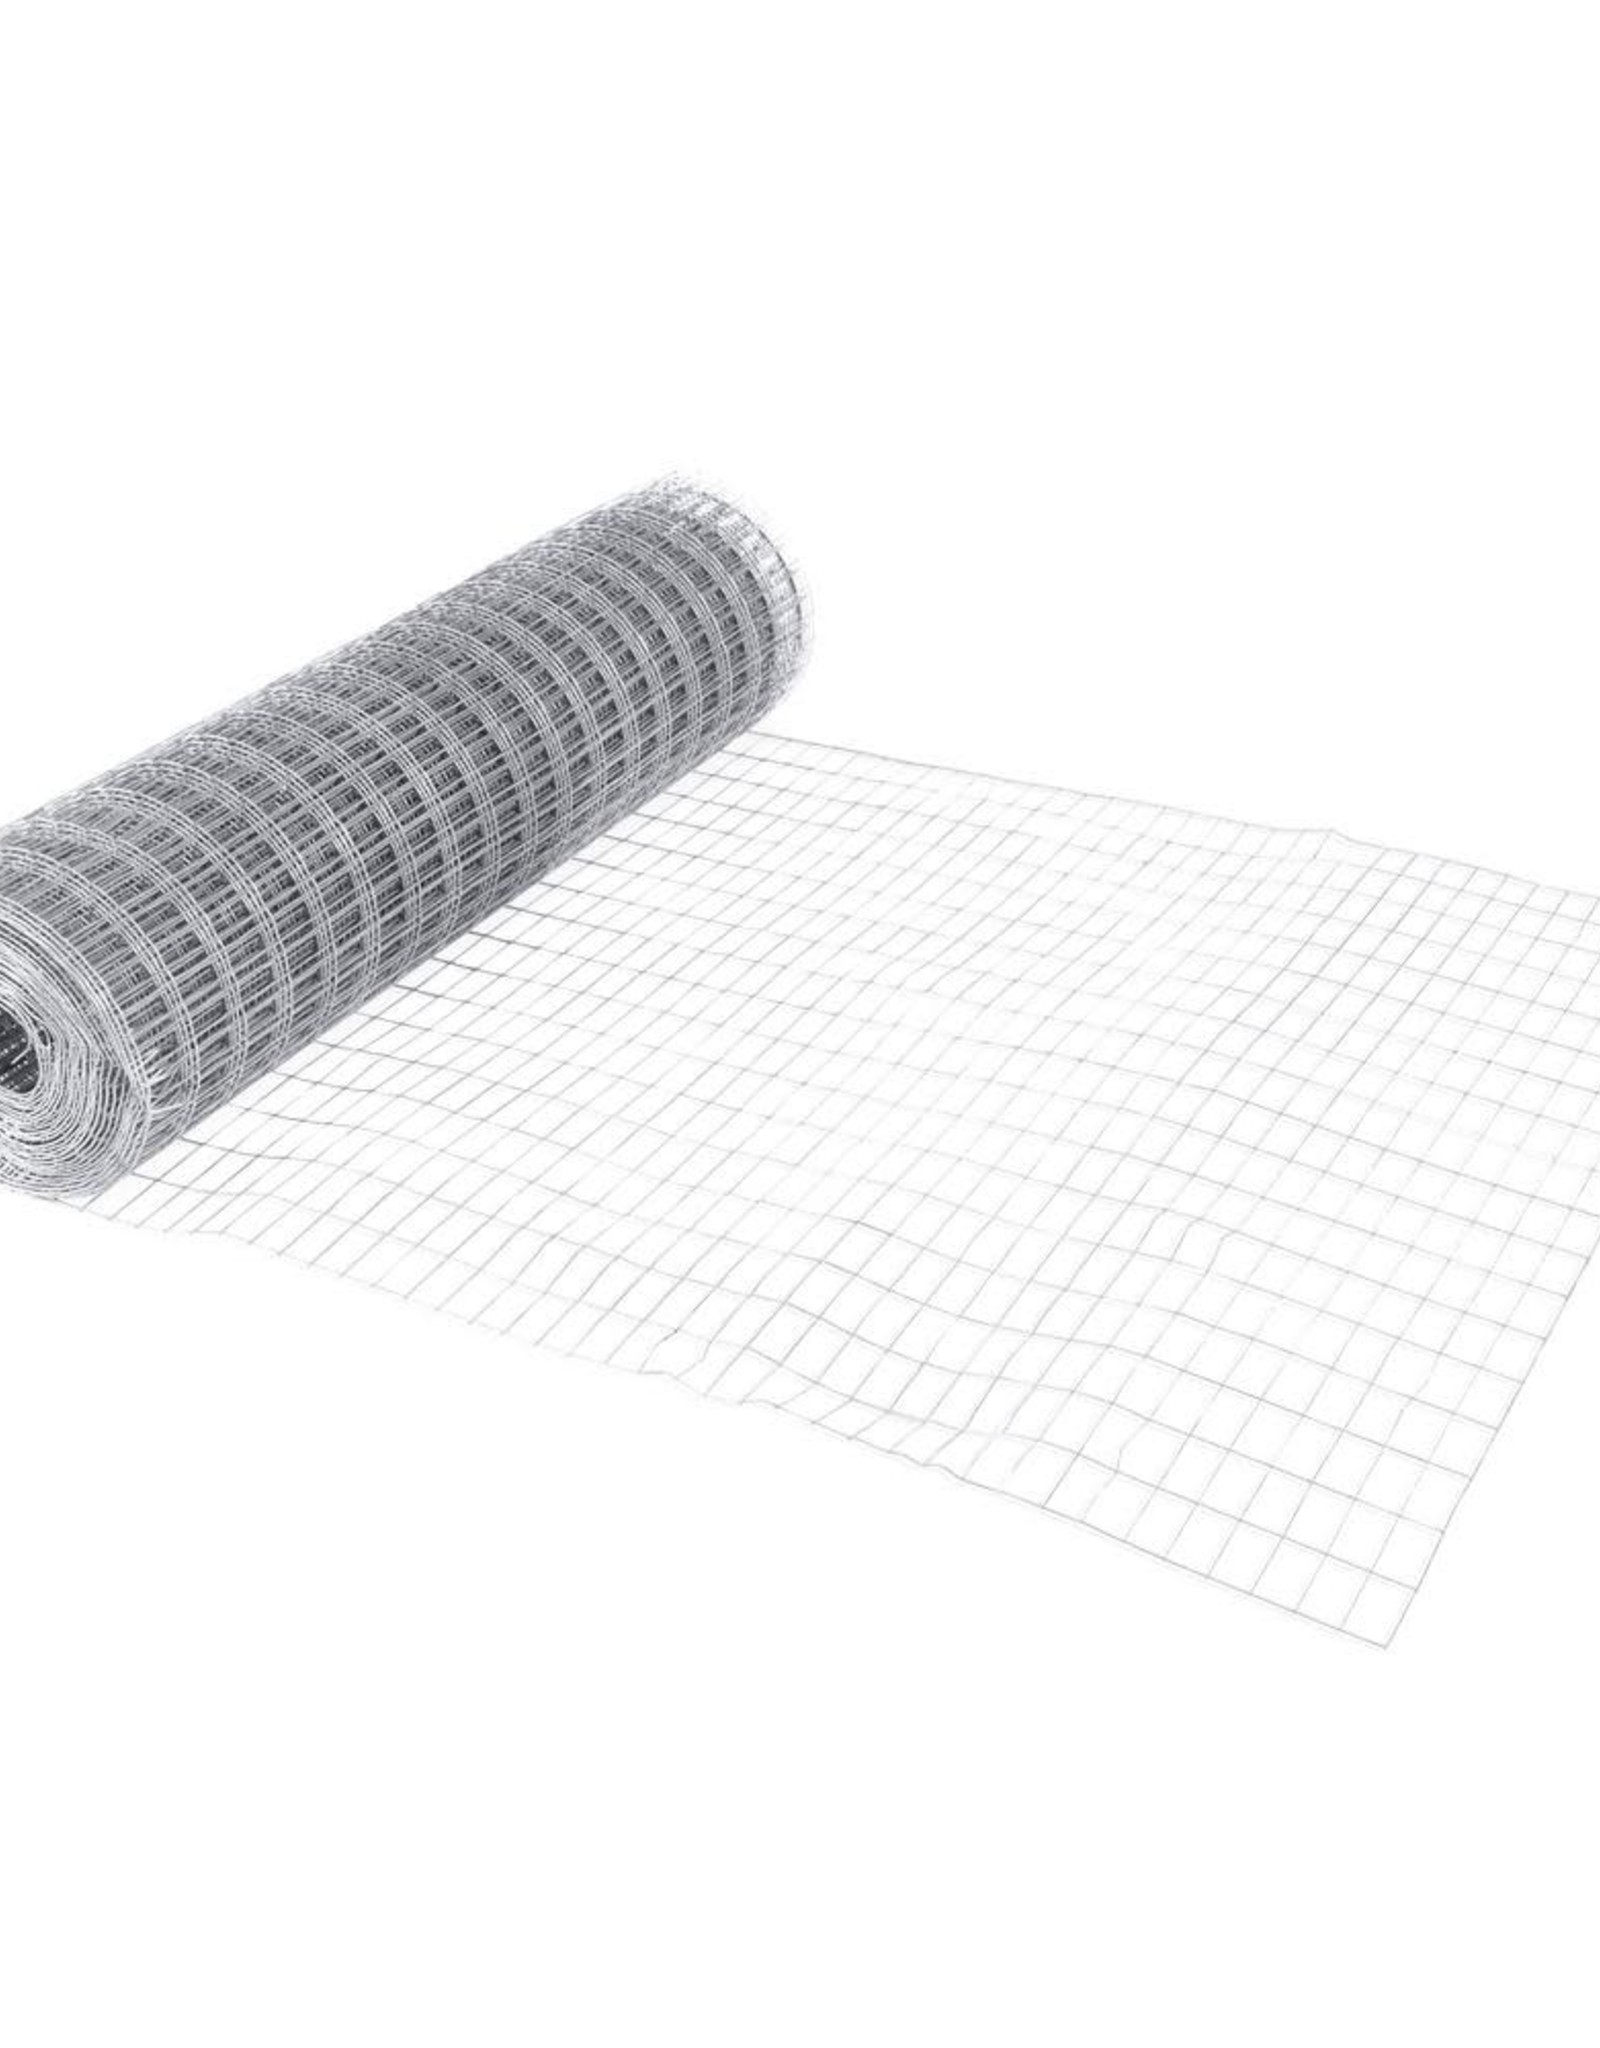 Grip-Rite Galvinized Welded Fence 14ga 24in x 2x1 25ft ROLL